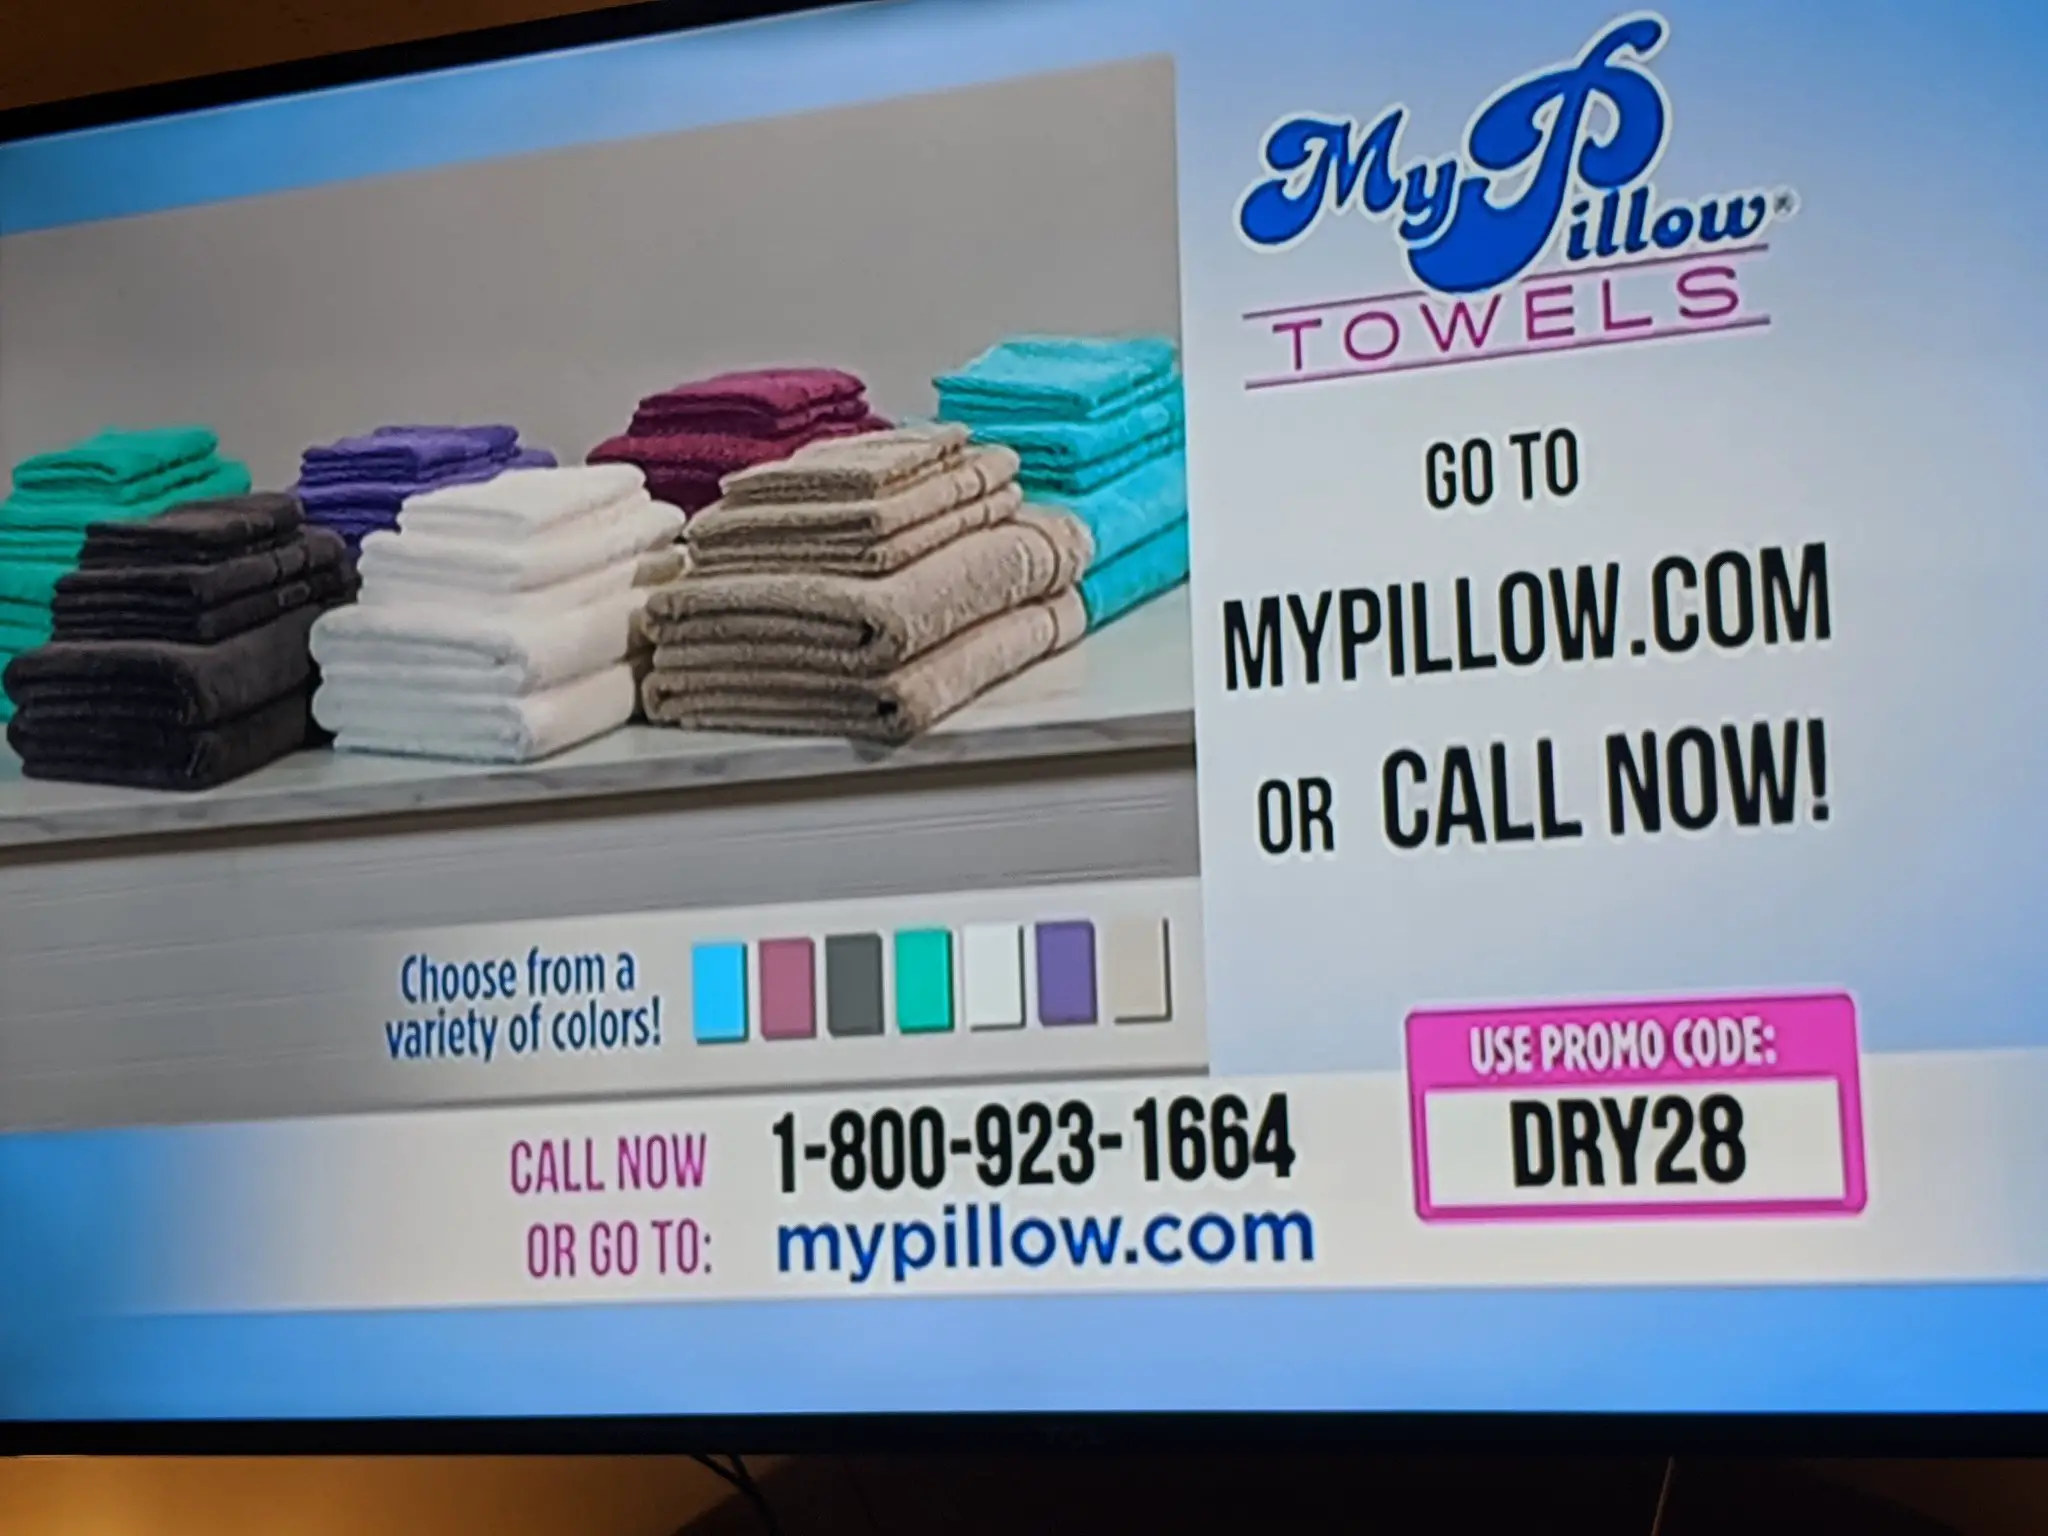 Mypillow Towels Promo Code / Mypillow Bath Towels That Actually Work ...